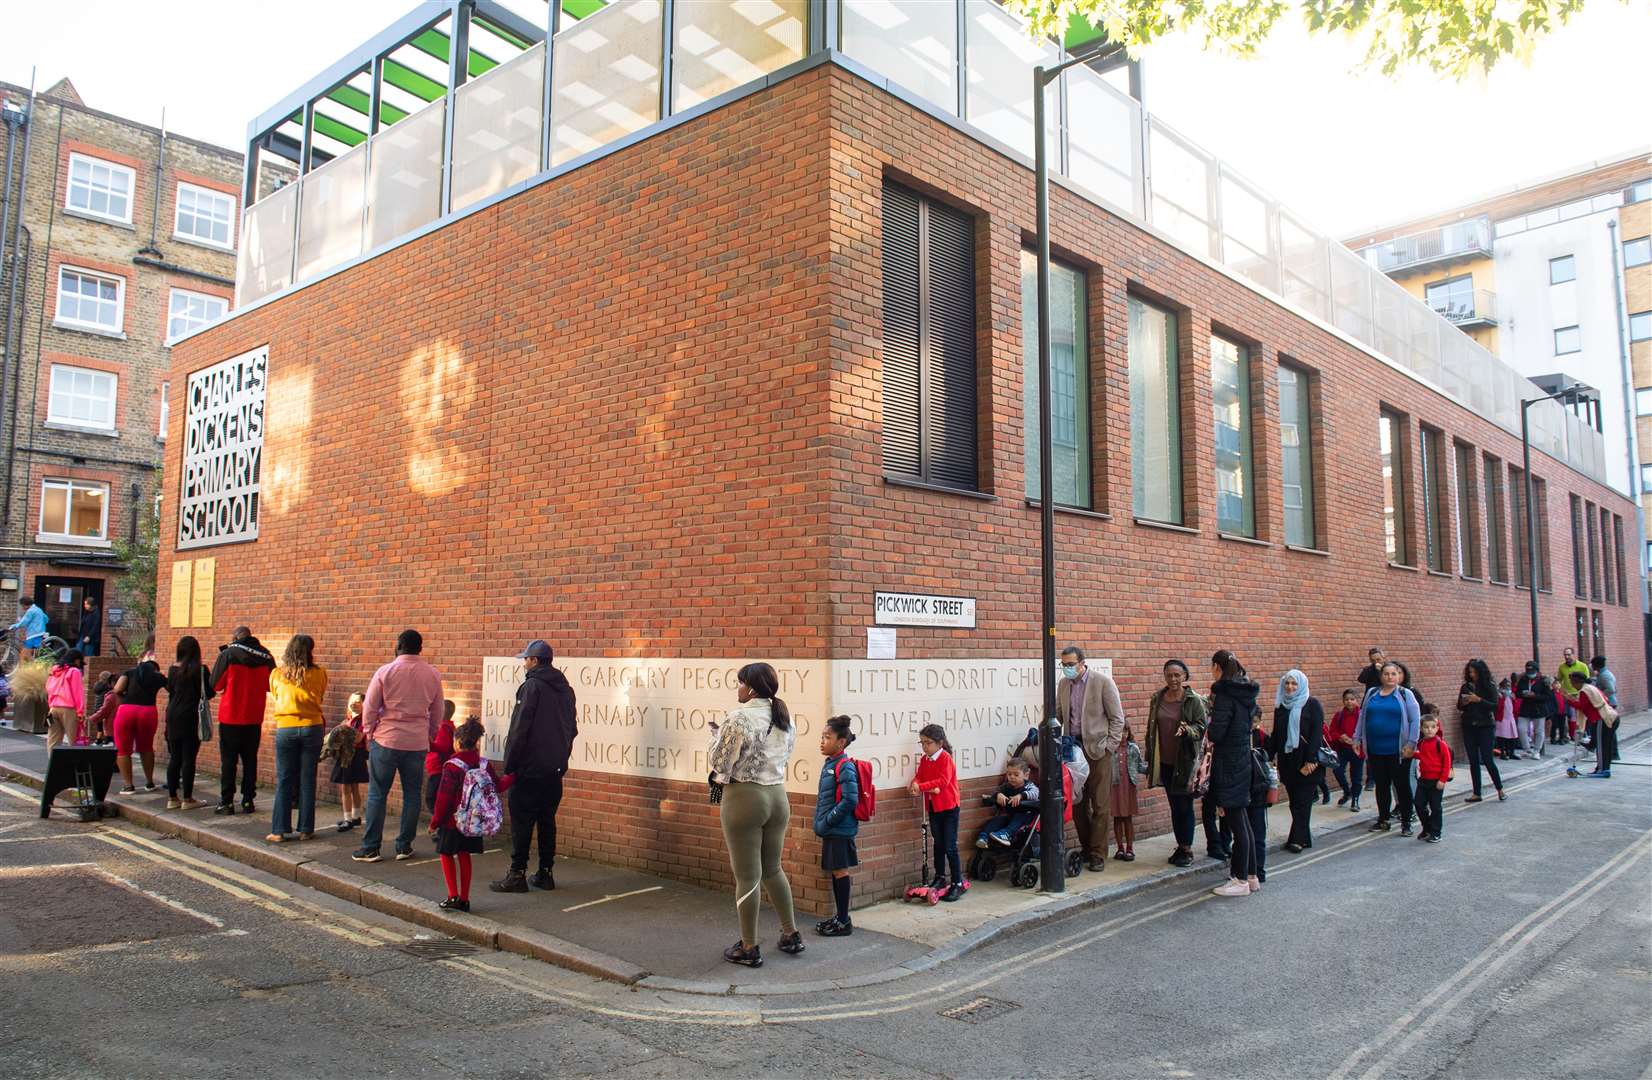 Pupils and parents were asked to queue up for drop-off on the first day back (Dominic Lipinski/PA)